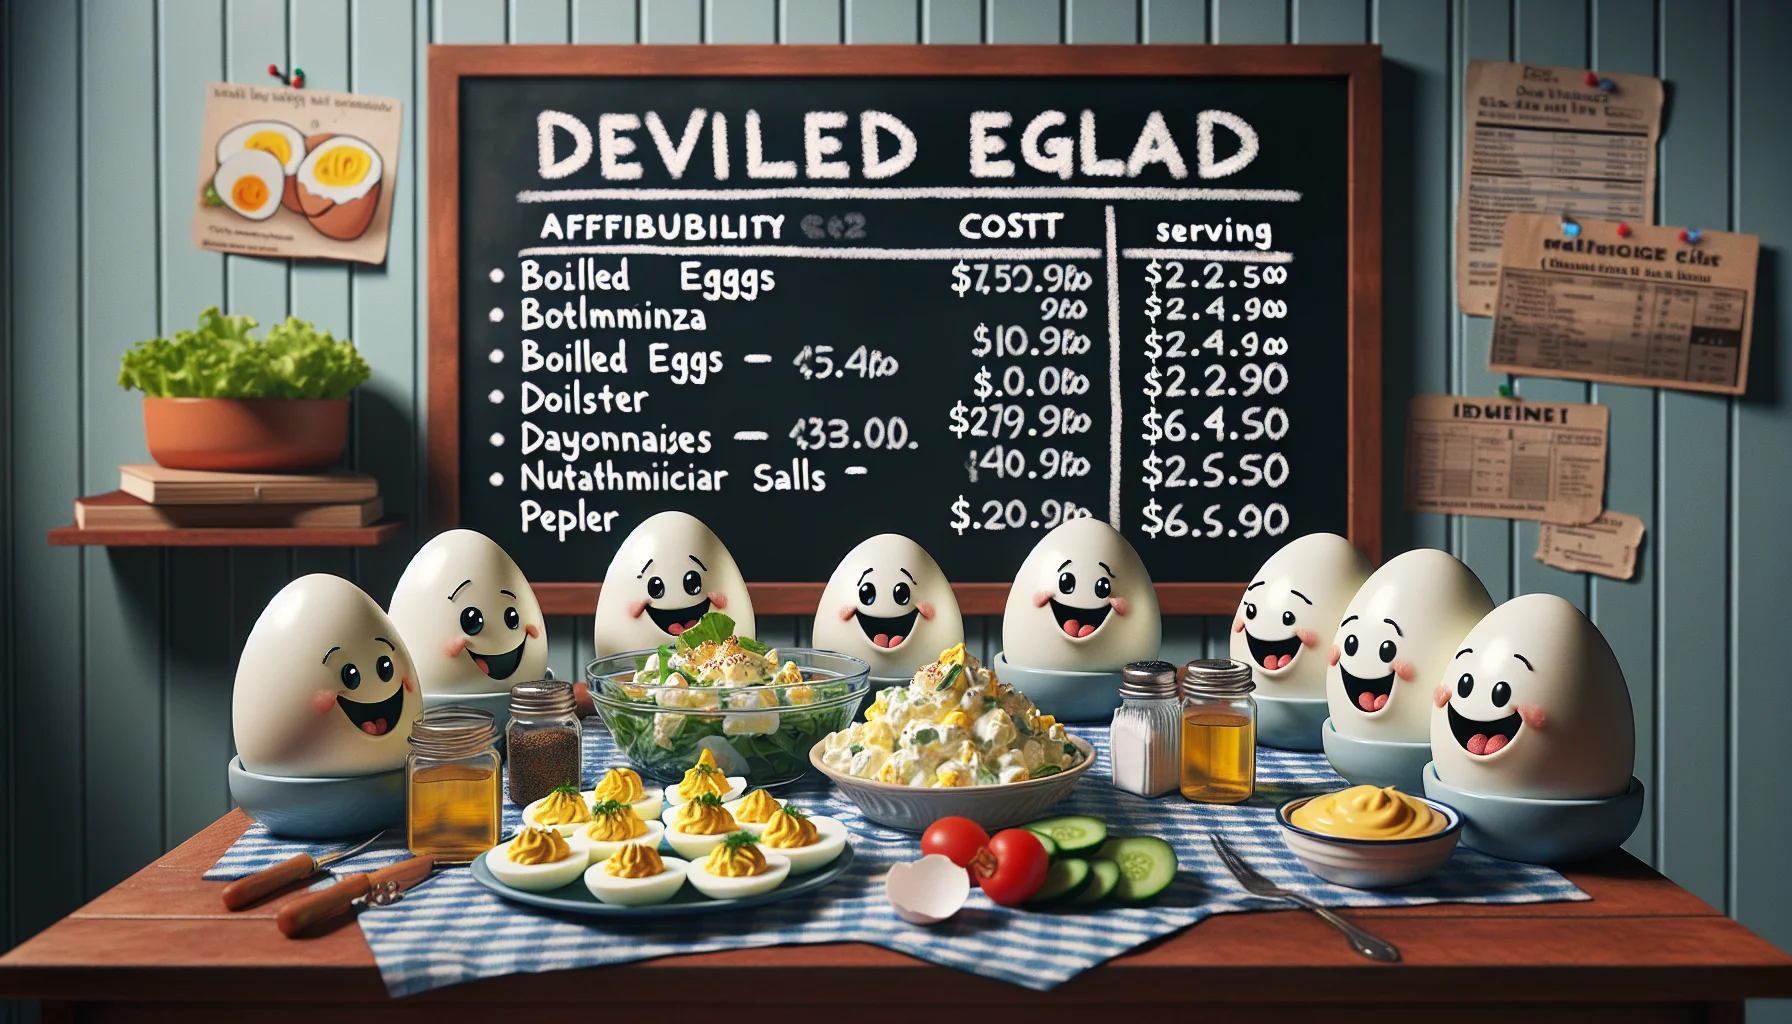 Create a humorous yet realistic scene centered around a deviled egg salad recipe. The image should highlight the affordability and health benefits of the dish. The scene may include a bunch of cartoonish smiling deviled eggs sitting around a table on a budget, discussing the recipe among themselves, with a chalkboard in the background portraying a breakdown of the cost per serving and nutritional content. The table should have on it the ingredients of a deviled egg salad - boiled eggs, mayonnaise, mustard, vinegar, salt, and pepper. The atmosphere should be vibrant, encouraging viewers to adopt a healthy diet for less cost.